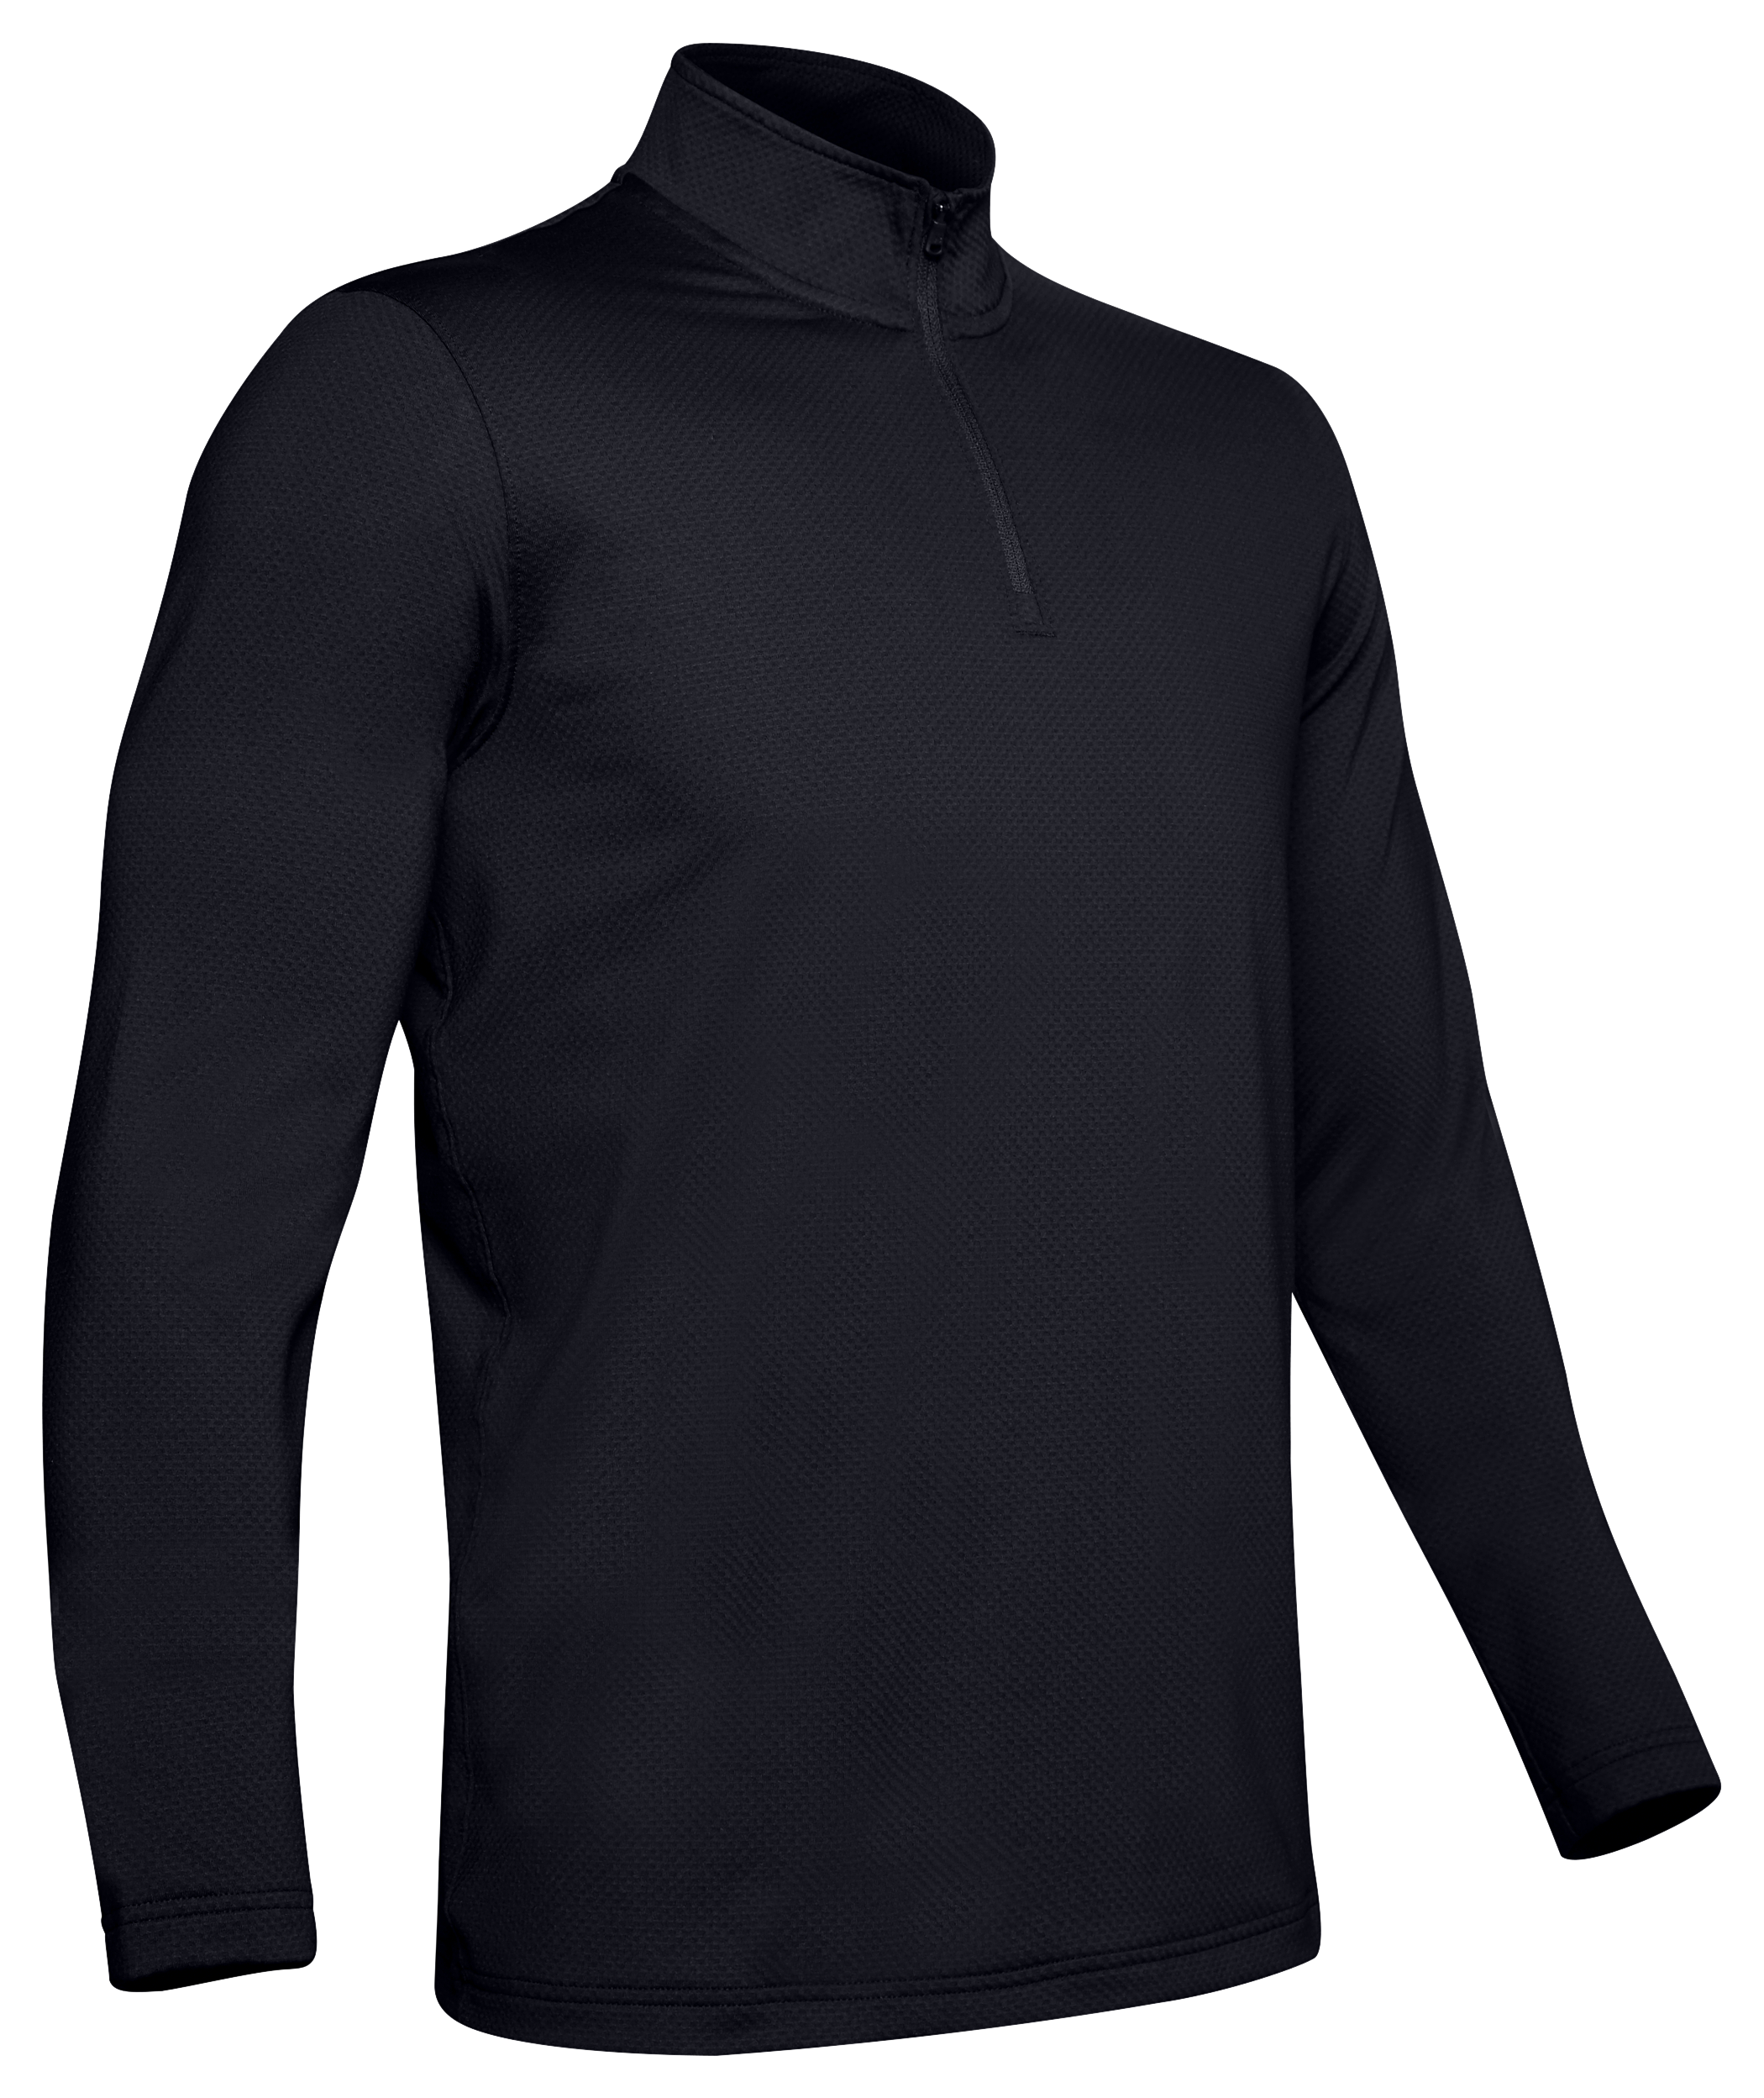 Under armour Polyester Long Sleeve Fishing Shirts & Tops for sale